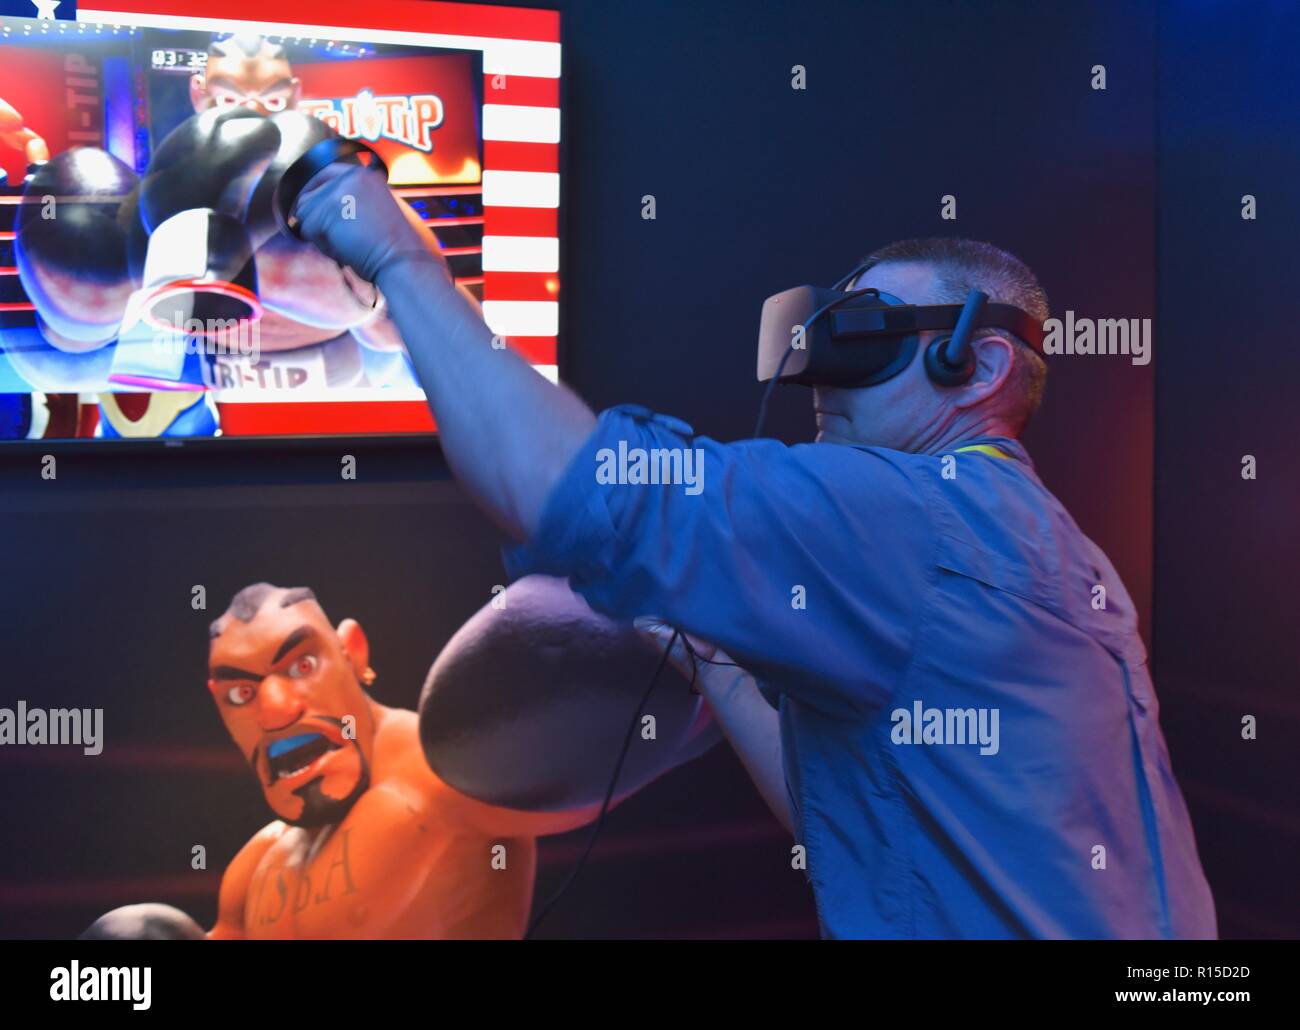 "Dell Experience" virtual reality boxing at CES (Consumer Electronics Show), the world’s largest technology trade show, held in Las Vegas, USA. Stock Photo